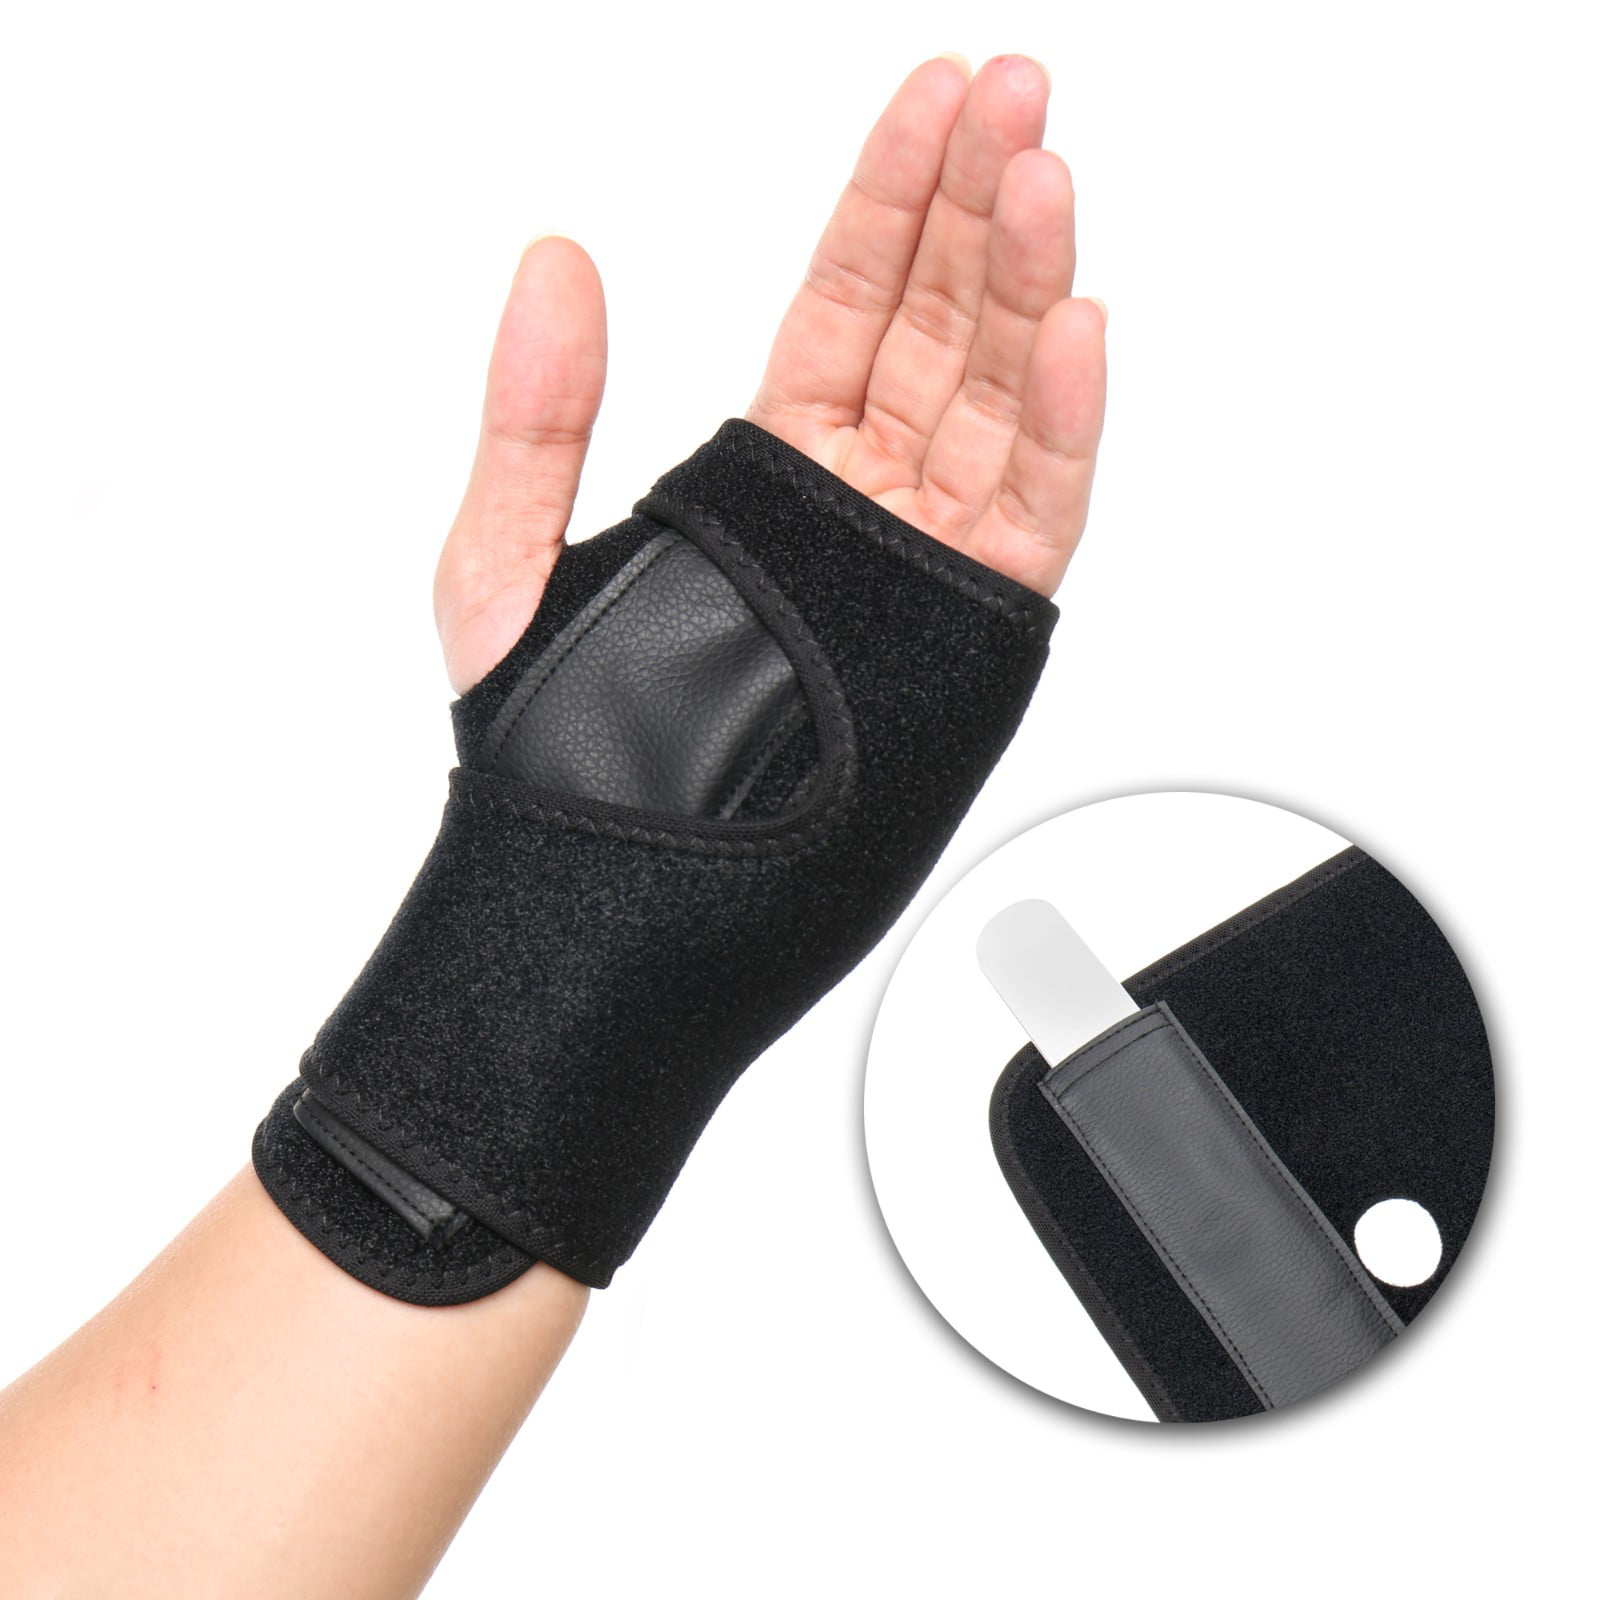 4fit Leather Weight Lifting Gloves Long Wrist Wrap Exercise Training Gym  S-XXL 